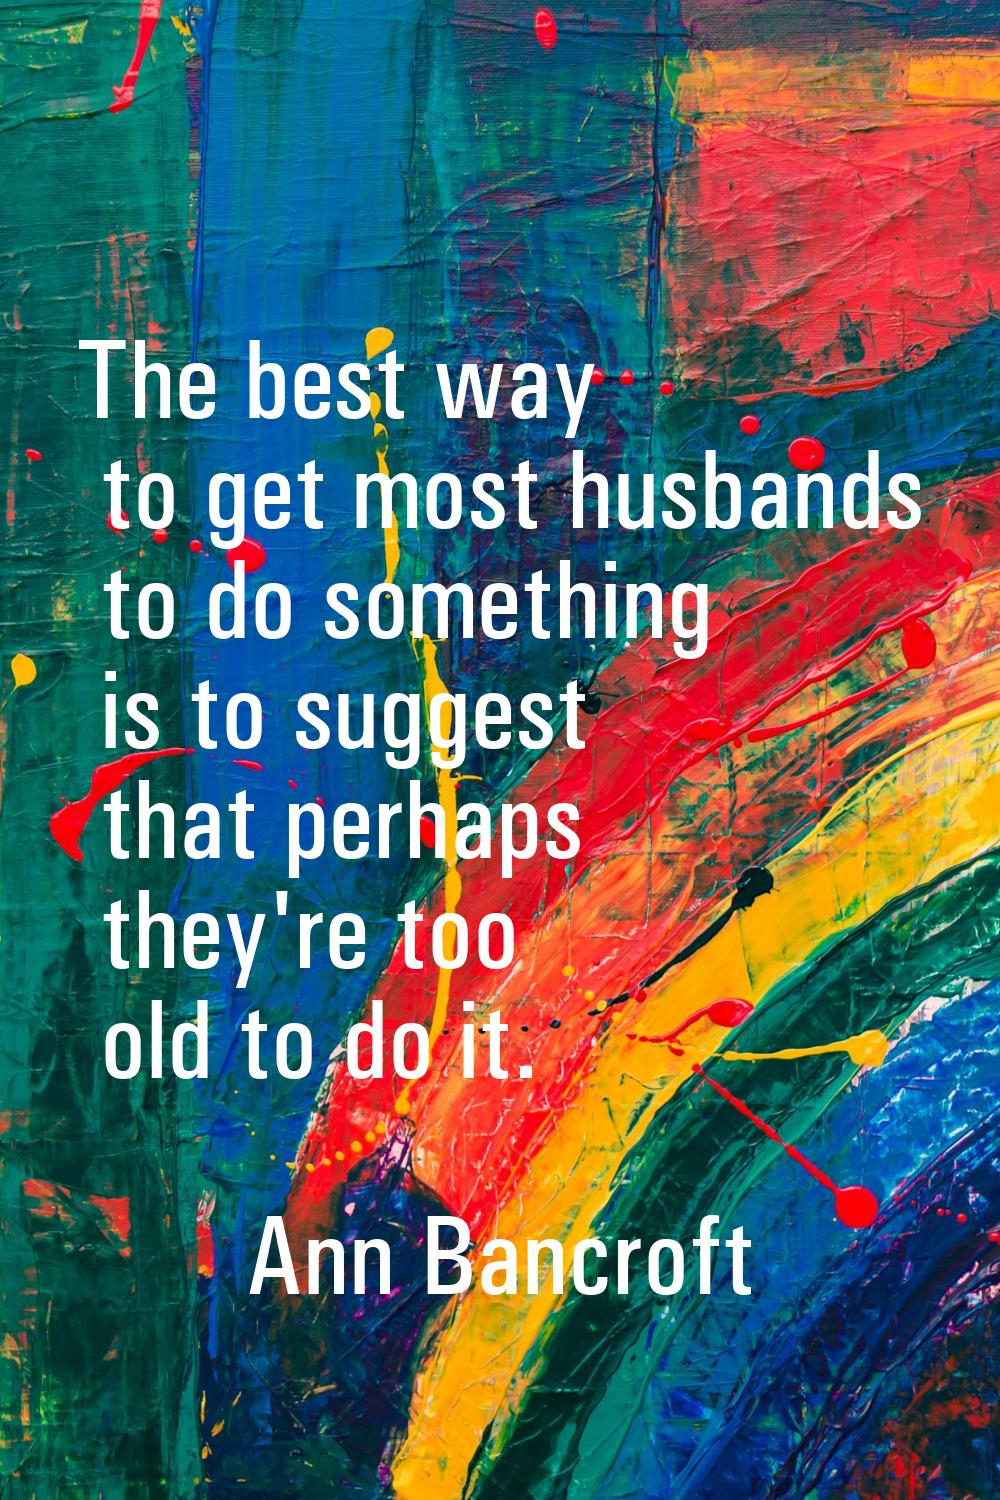 The best way to get most husbands to do something is to suggest that perhaps they're too old to do 